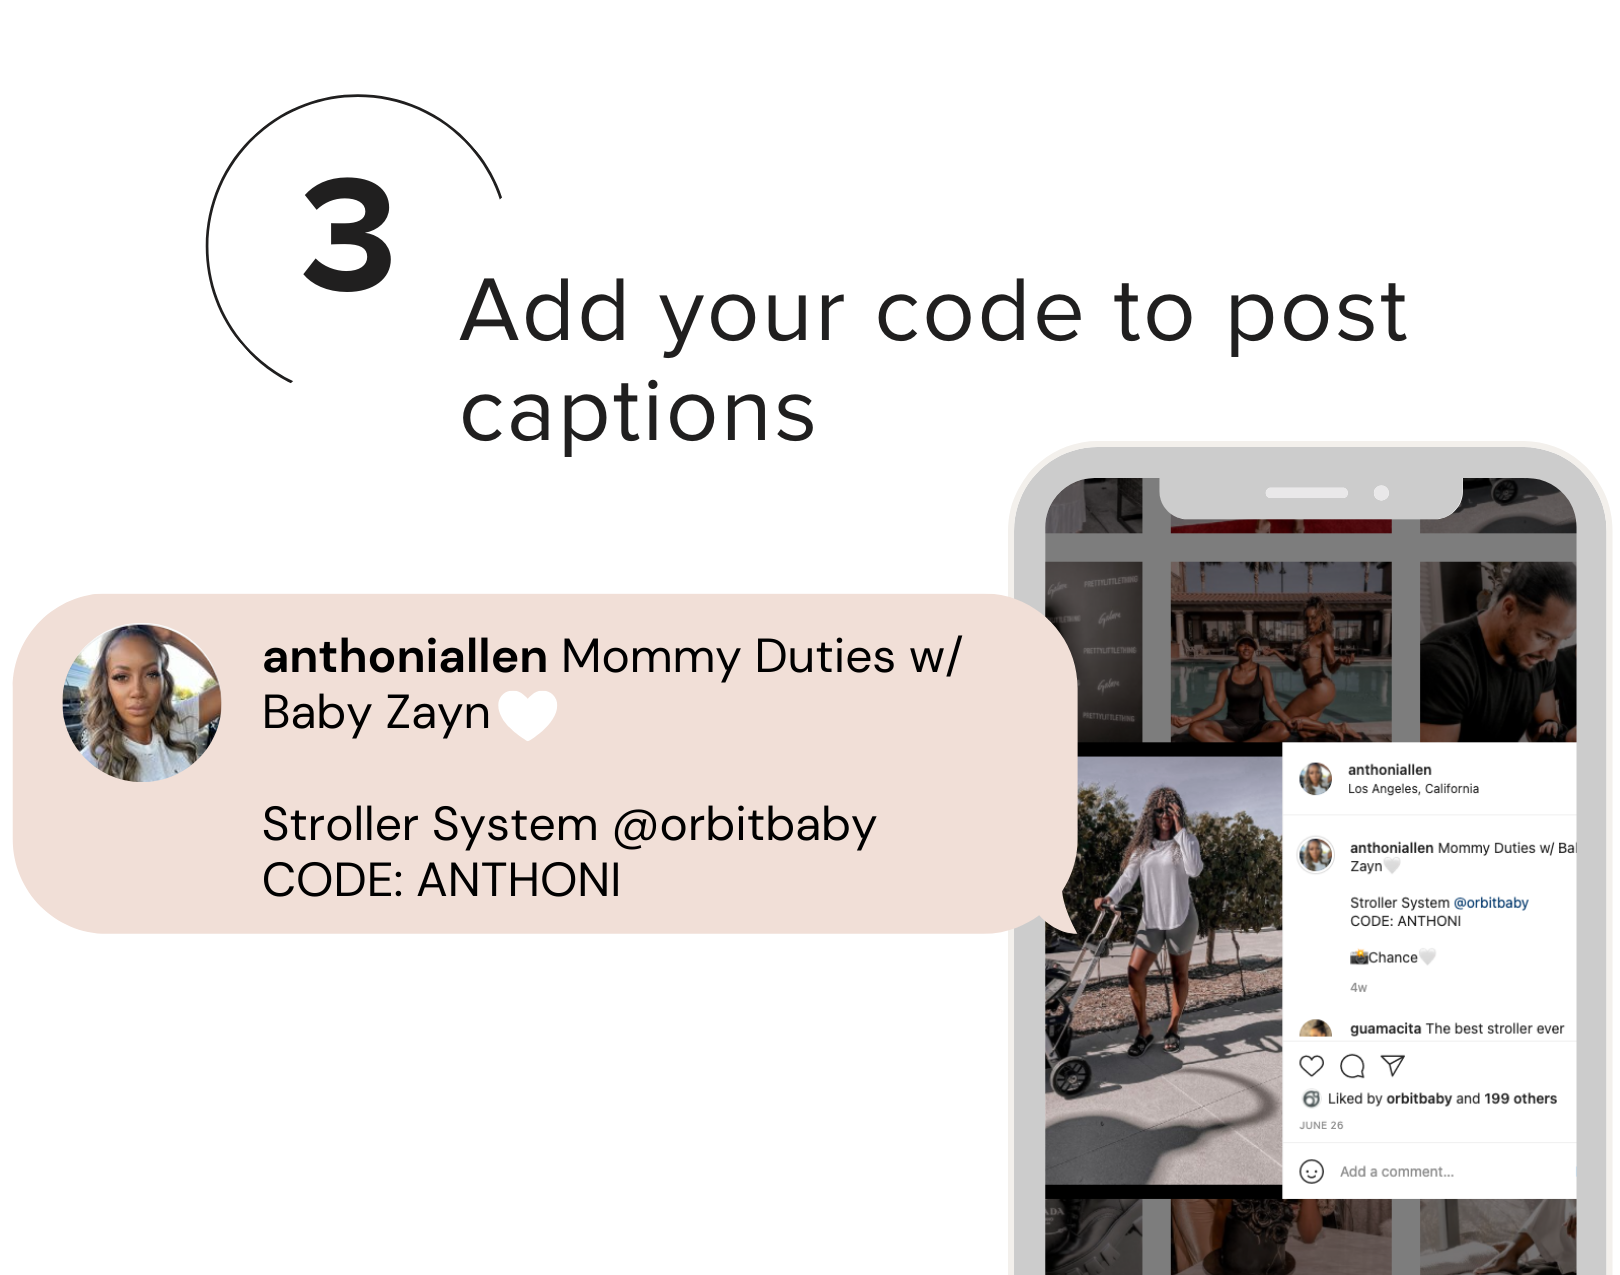 Add your code to post captions